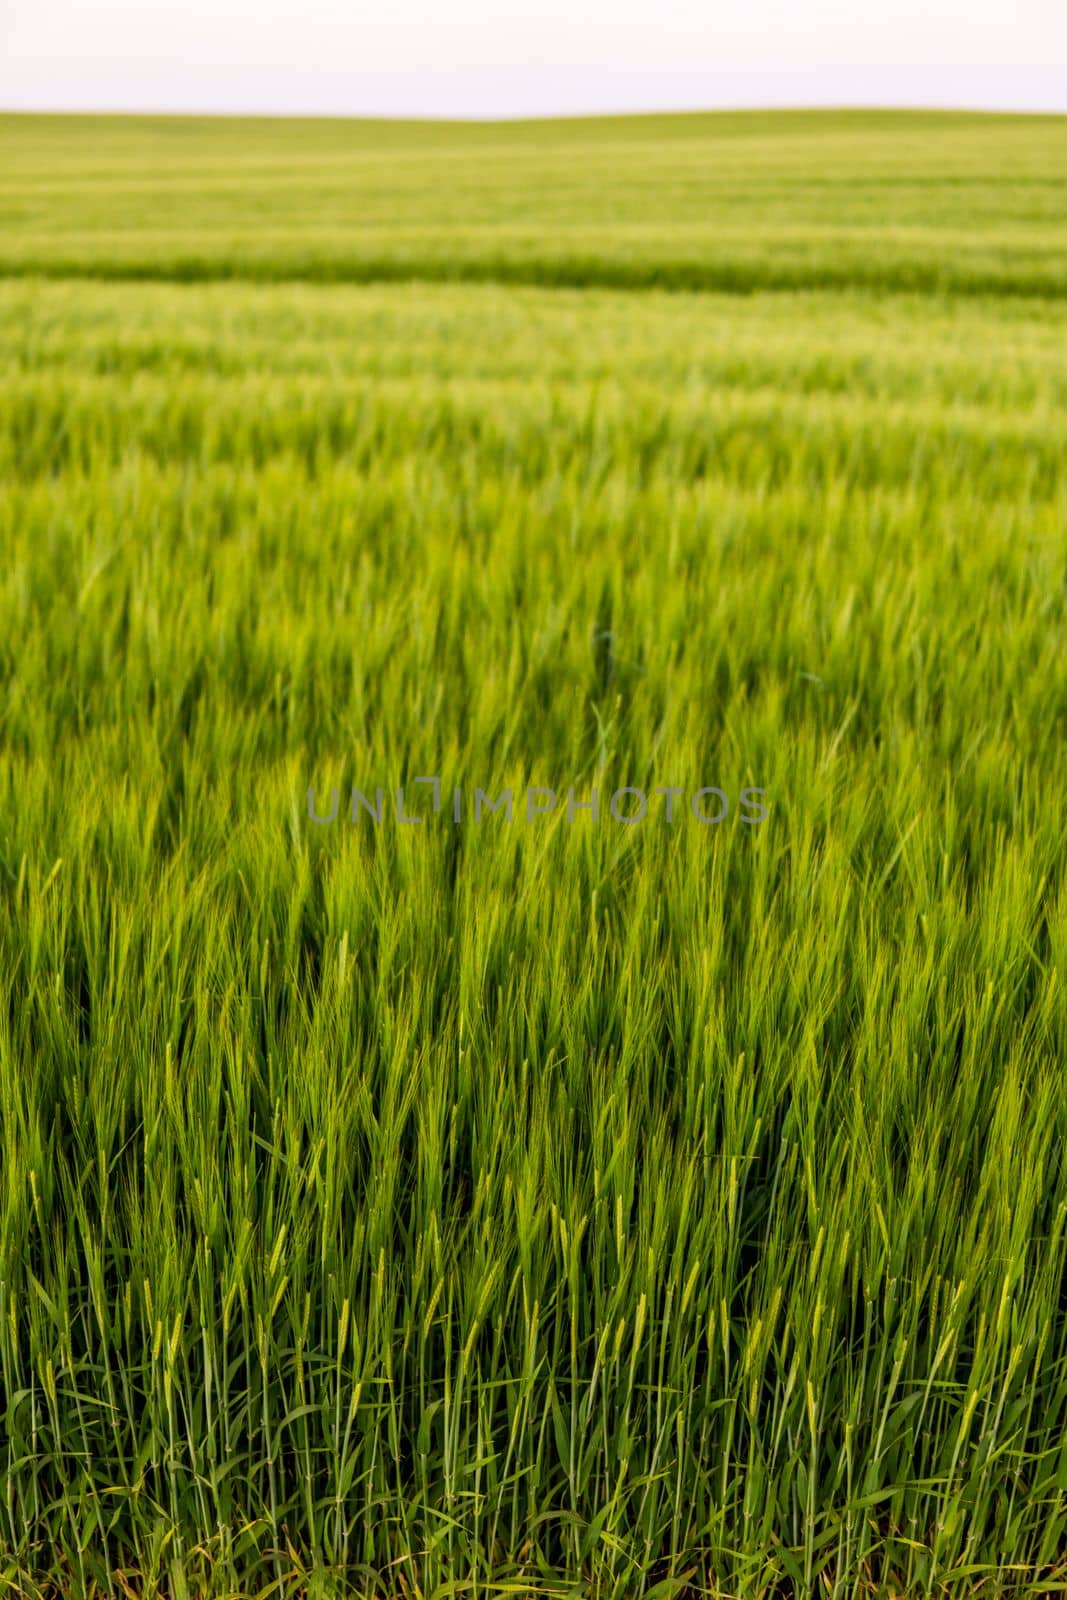 Barley growing in agricultural field in spring. Unripe cereals. by vovsht